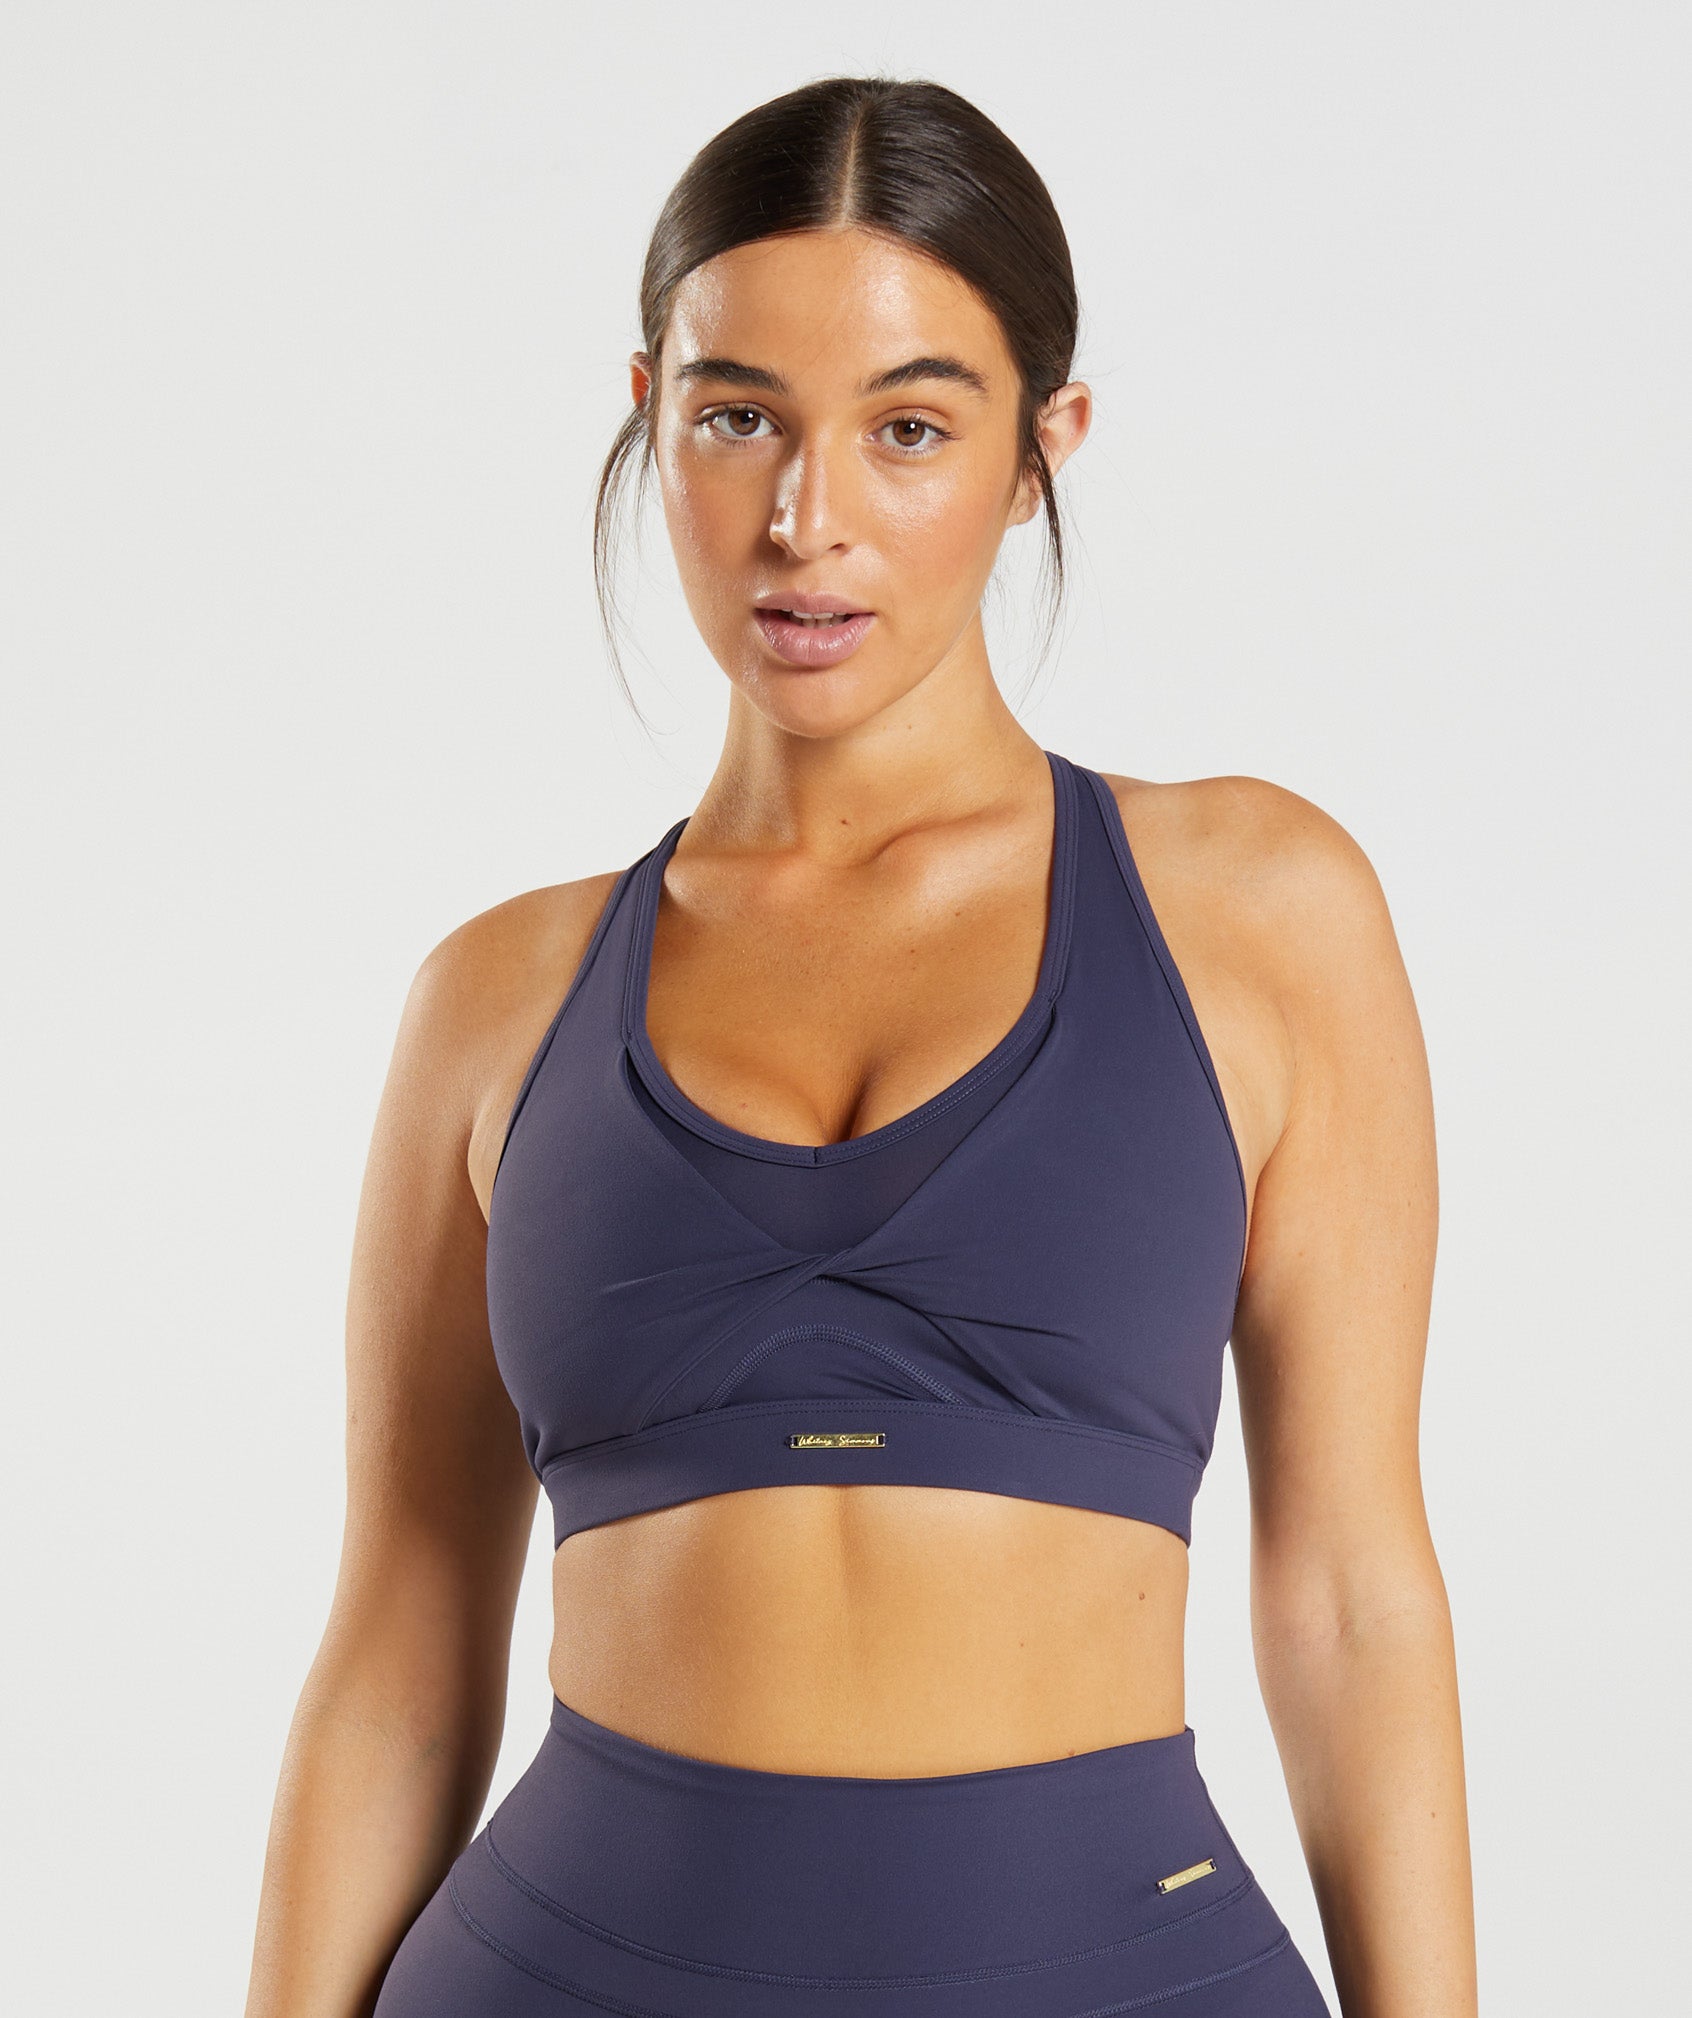 Get Fit with the NEW Whitney Simmons Gymshark Goal Blue Mesh Sports Bra